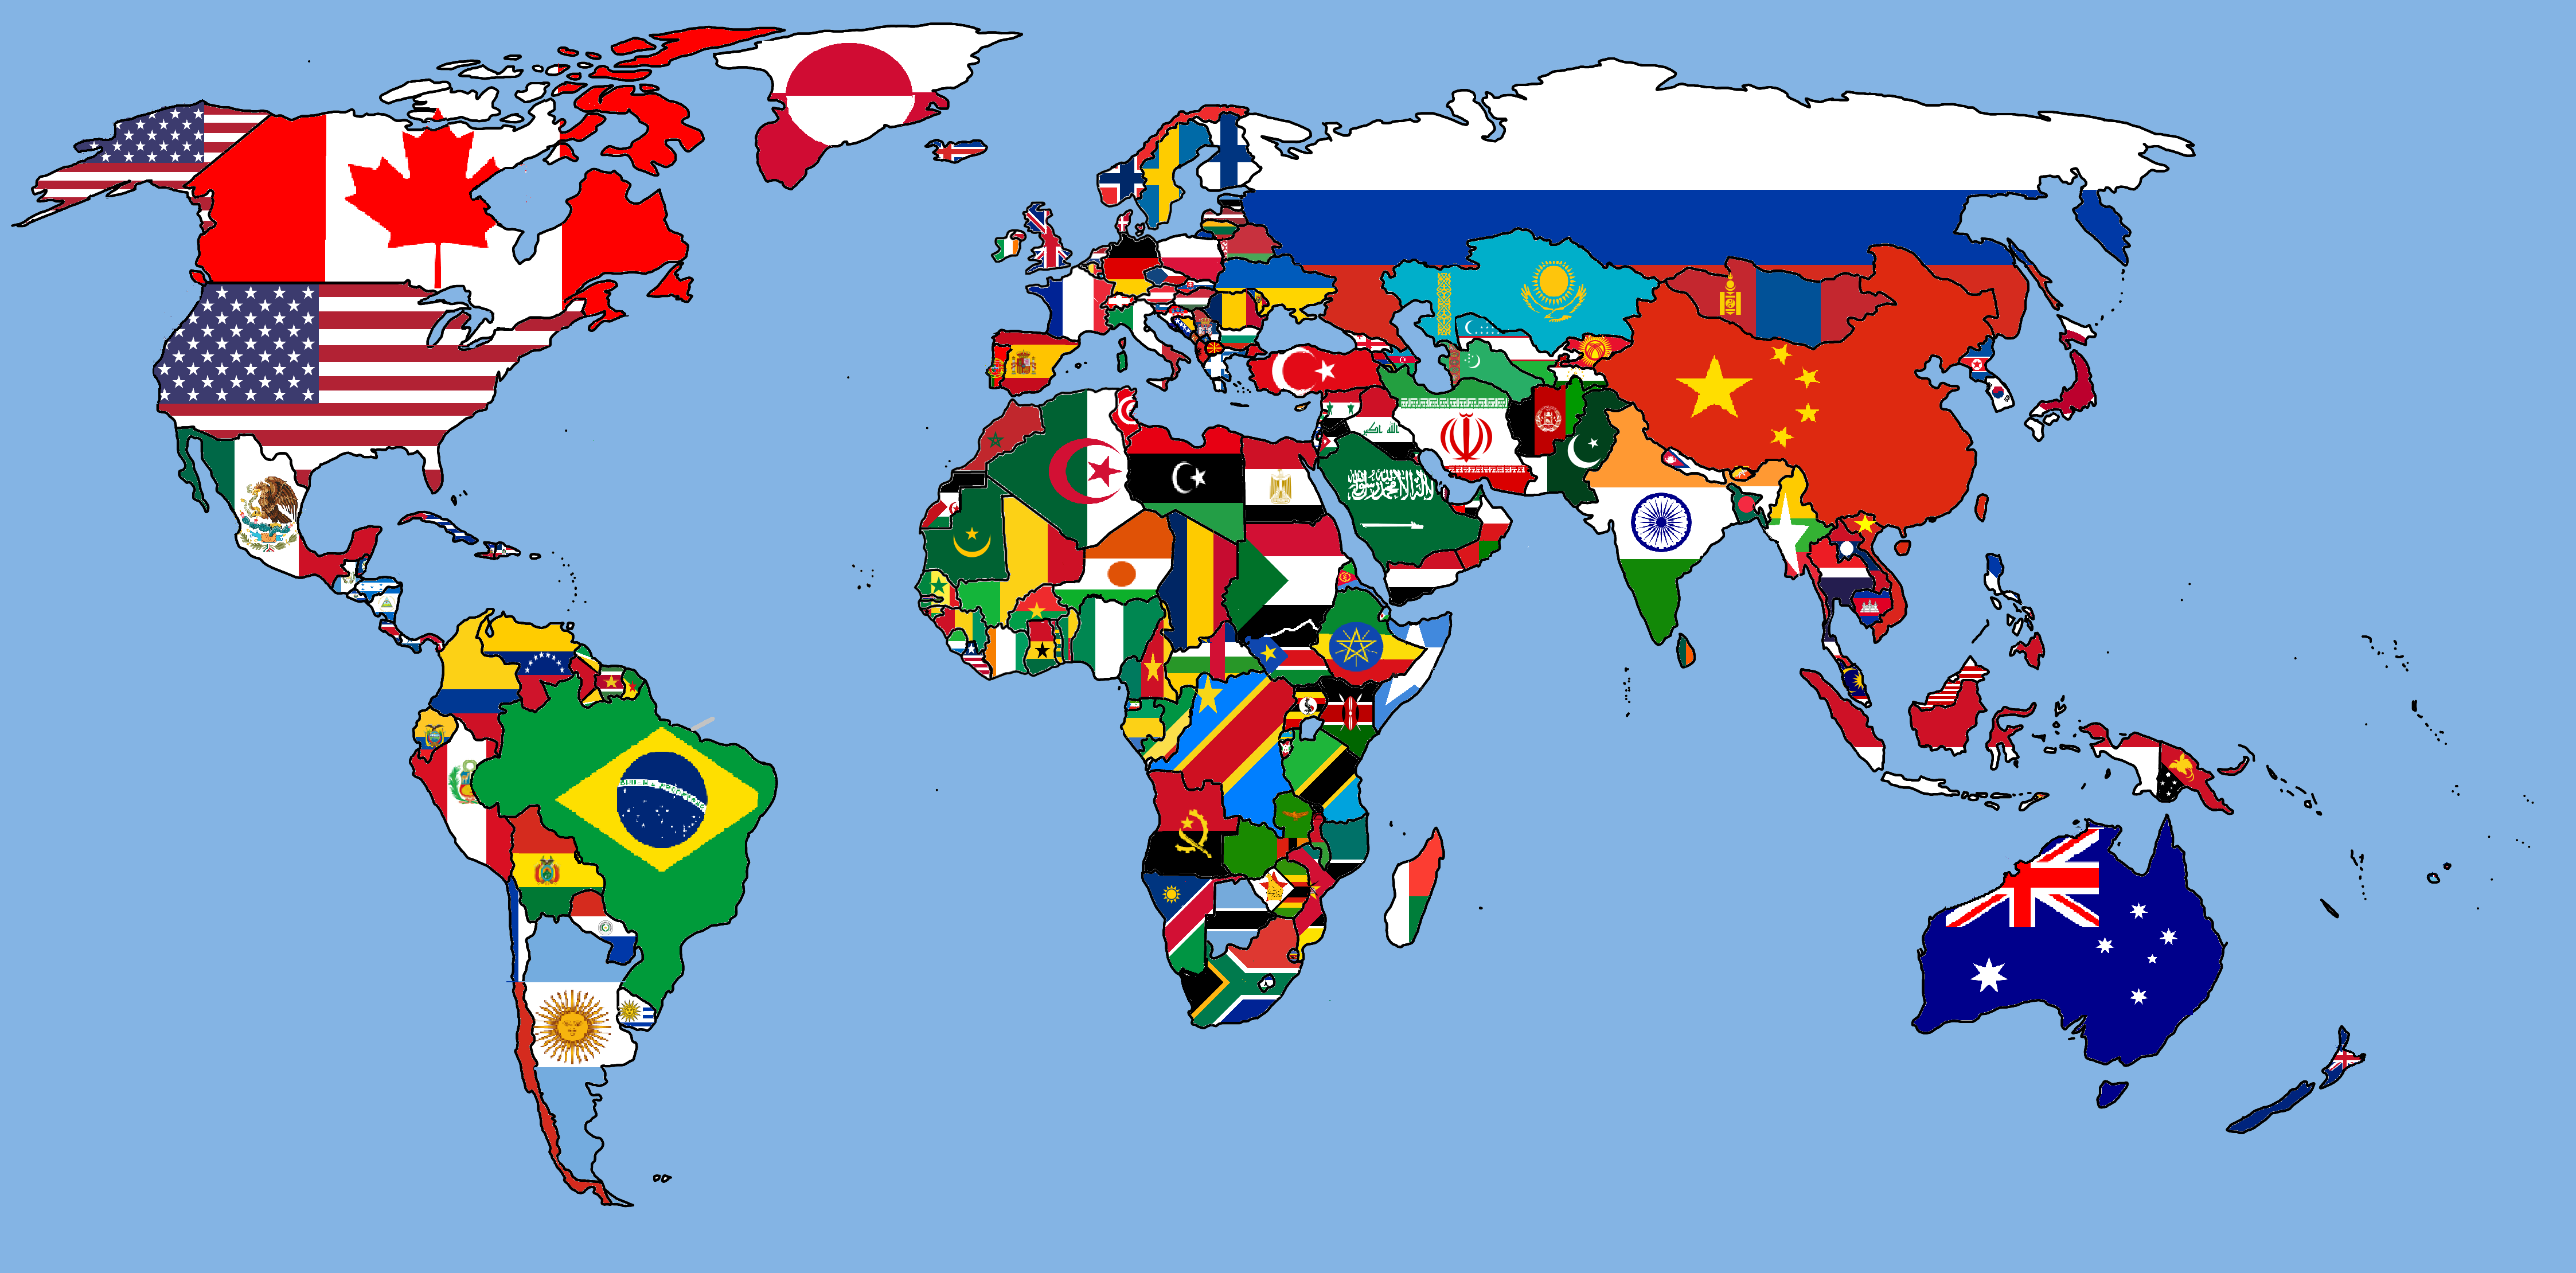 File:World Flag map.png - Wikimedia Commons